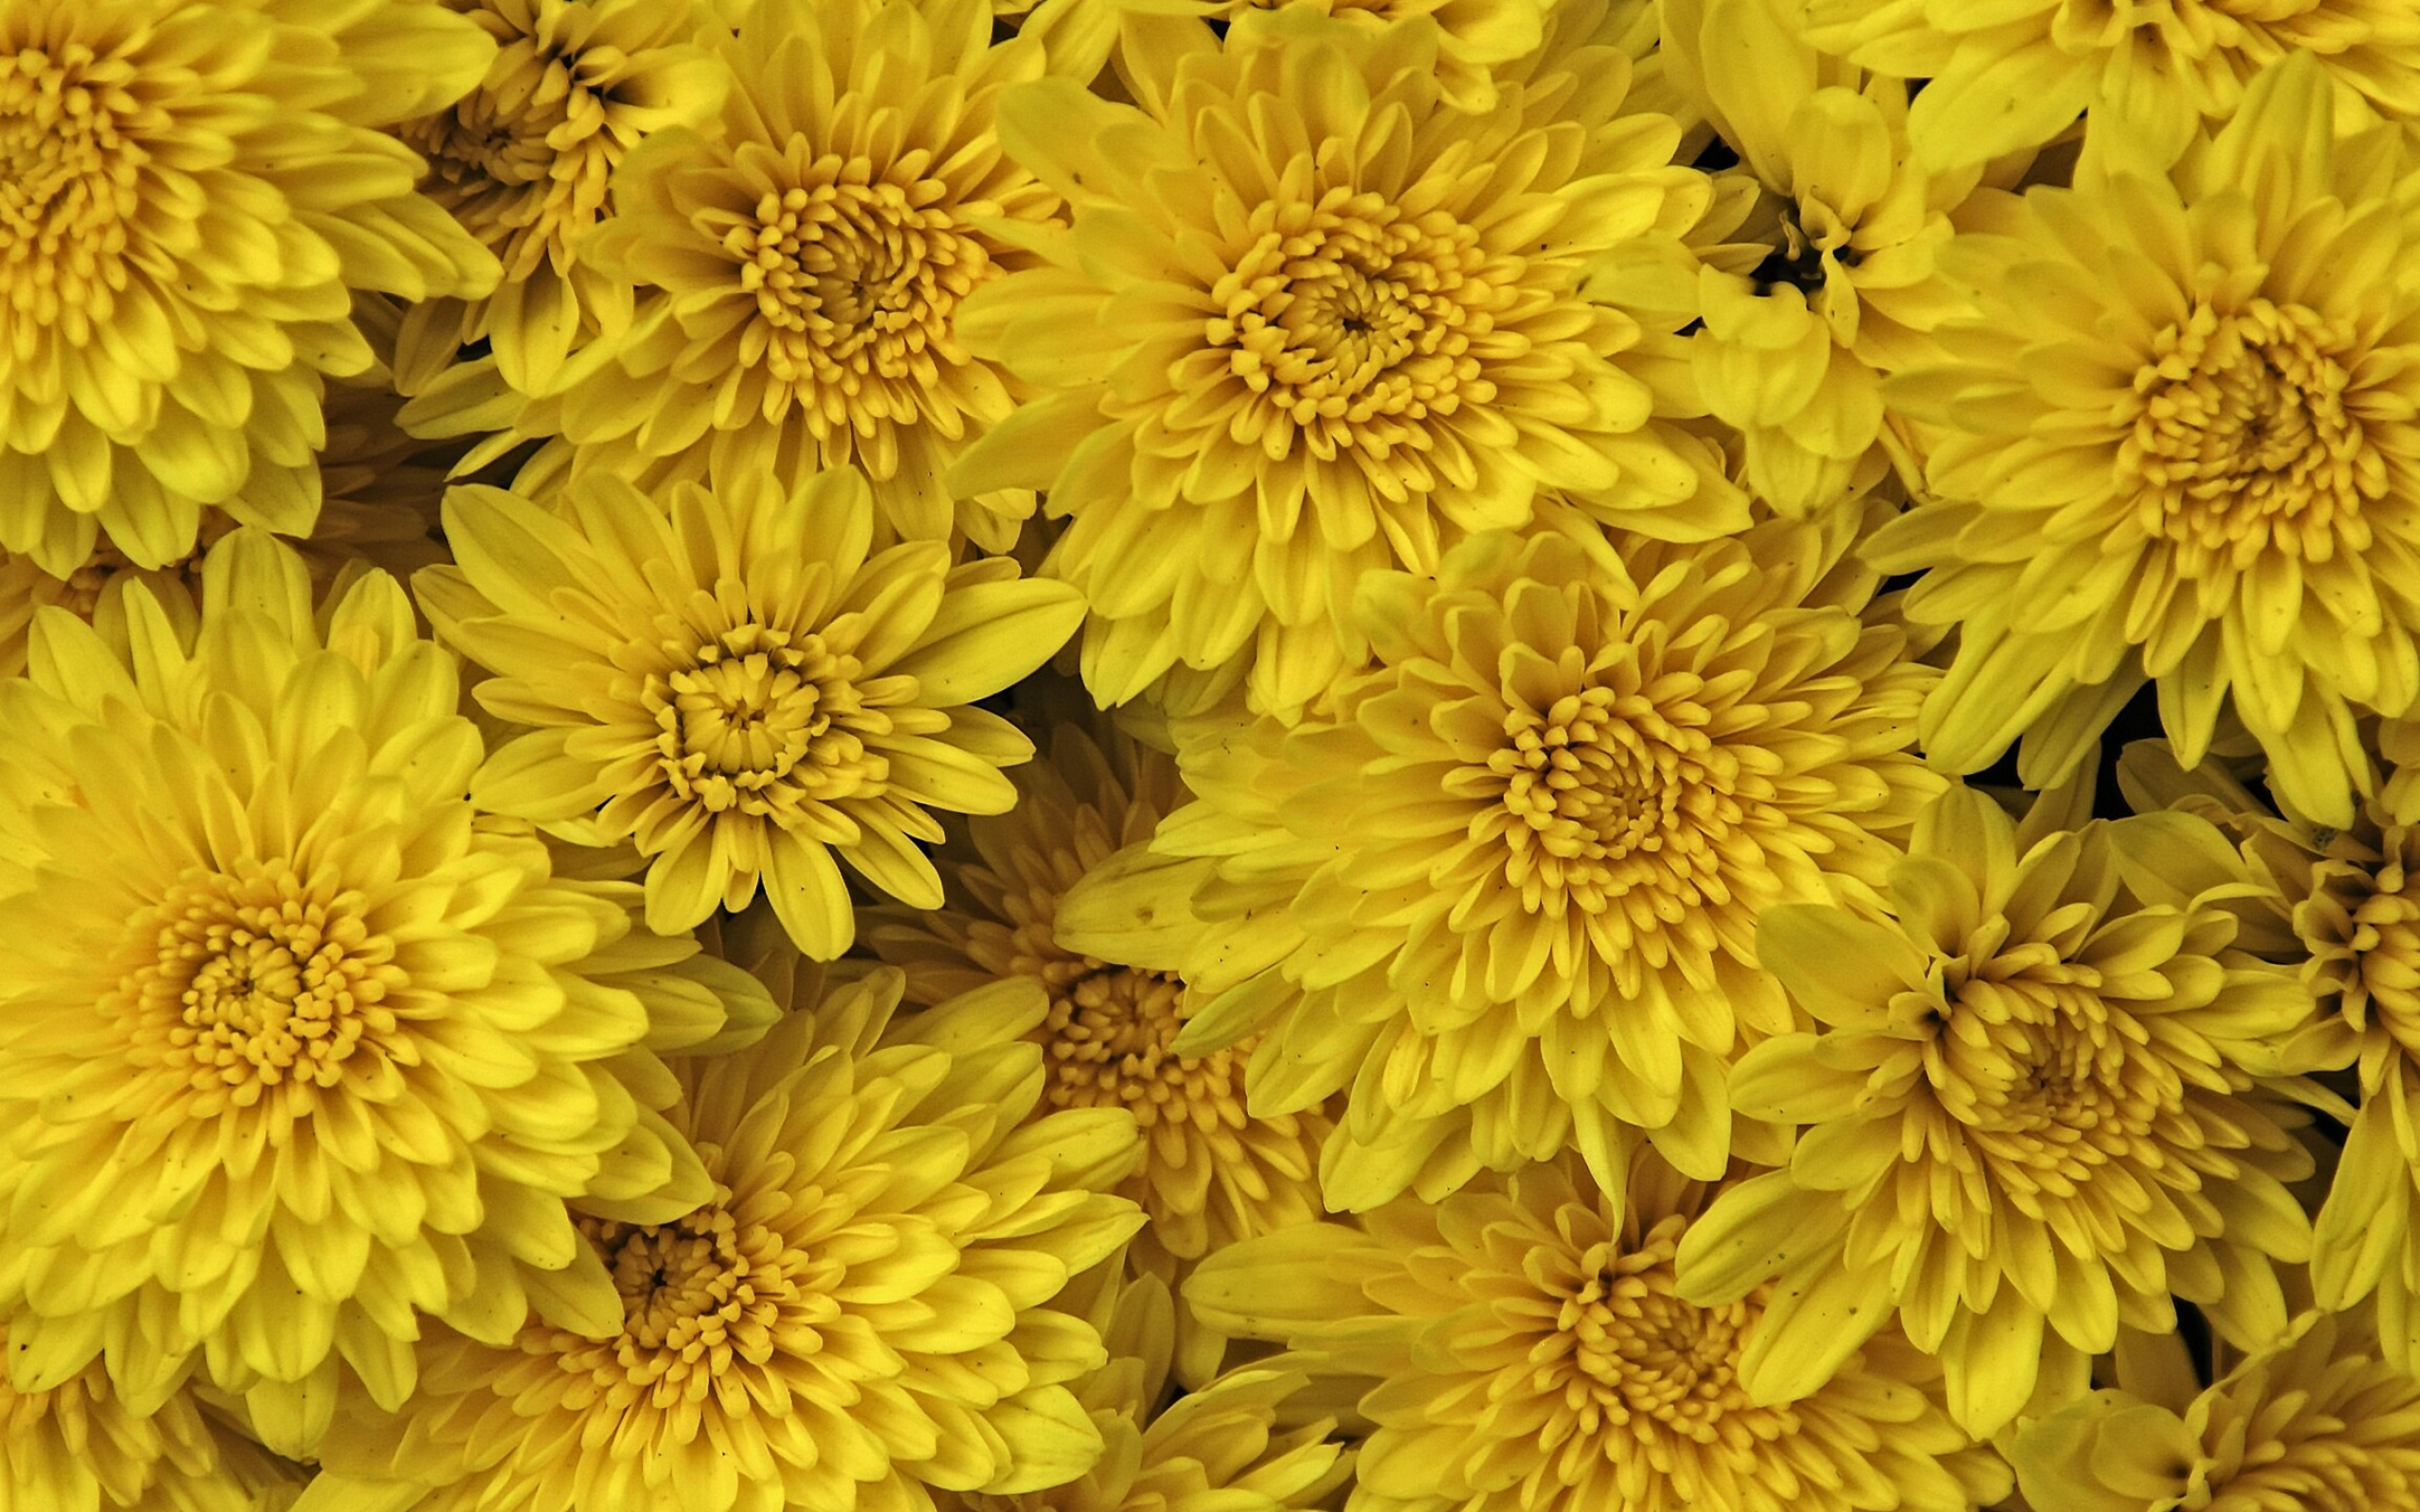 Chrysanthemum: Many horticultural specimens have been bred to bear many rows of ray florets in a great variety of colors. 2560x1600 HD Wallpaper.